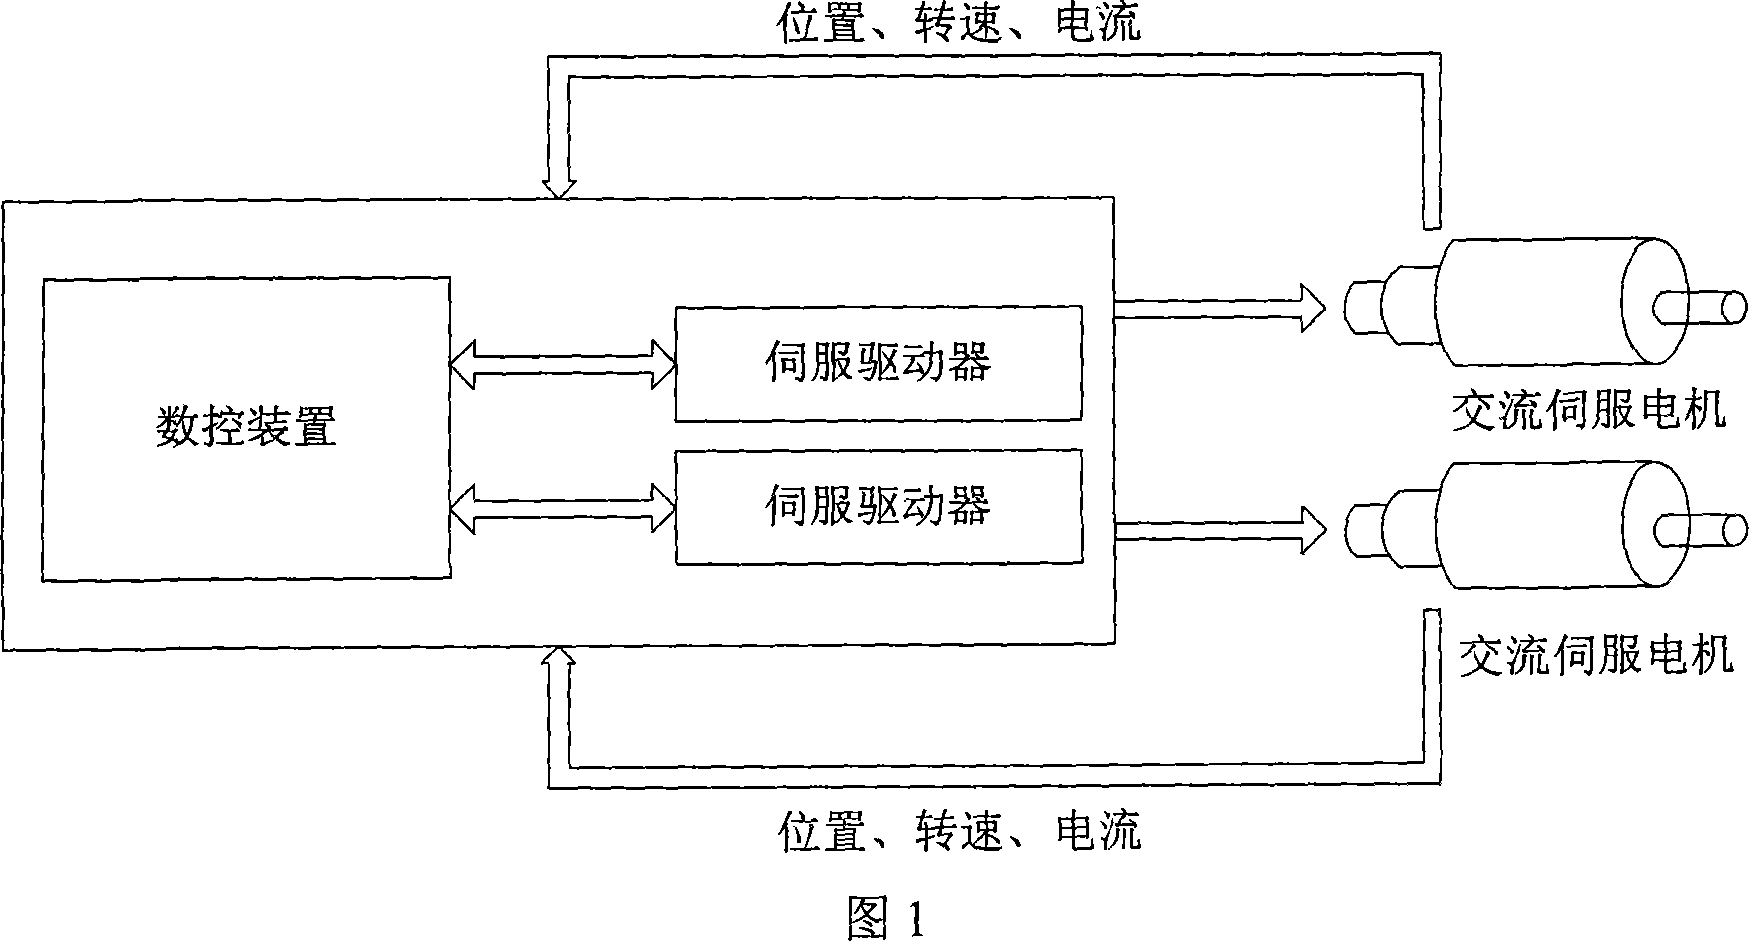 Digital control system of superconducting strip material insulation wrapping device